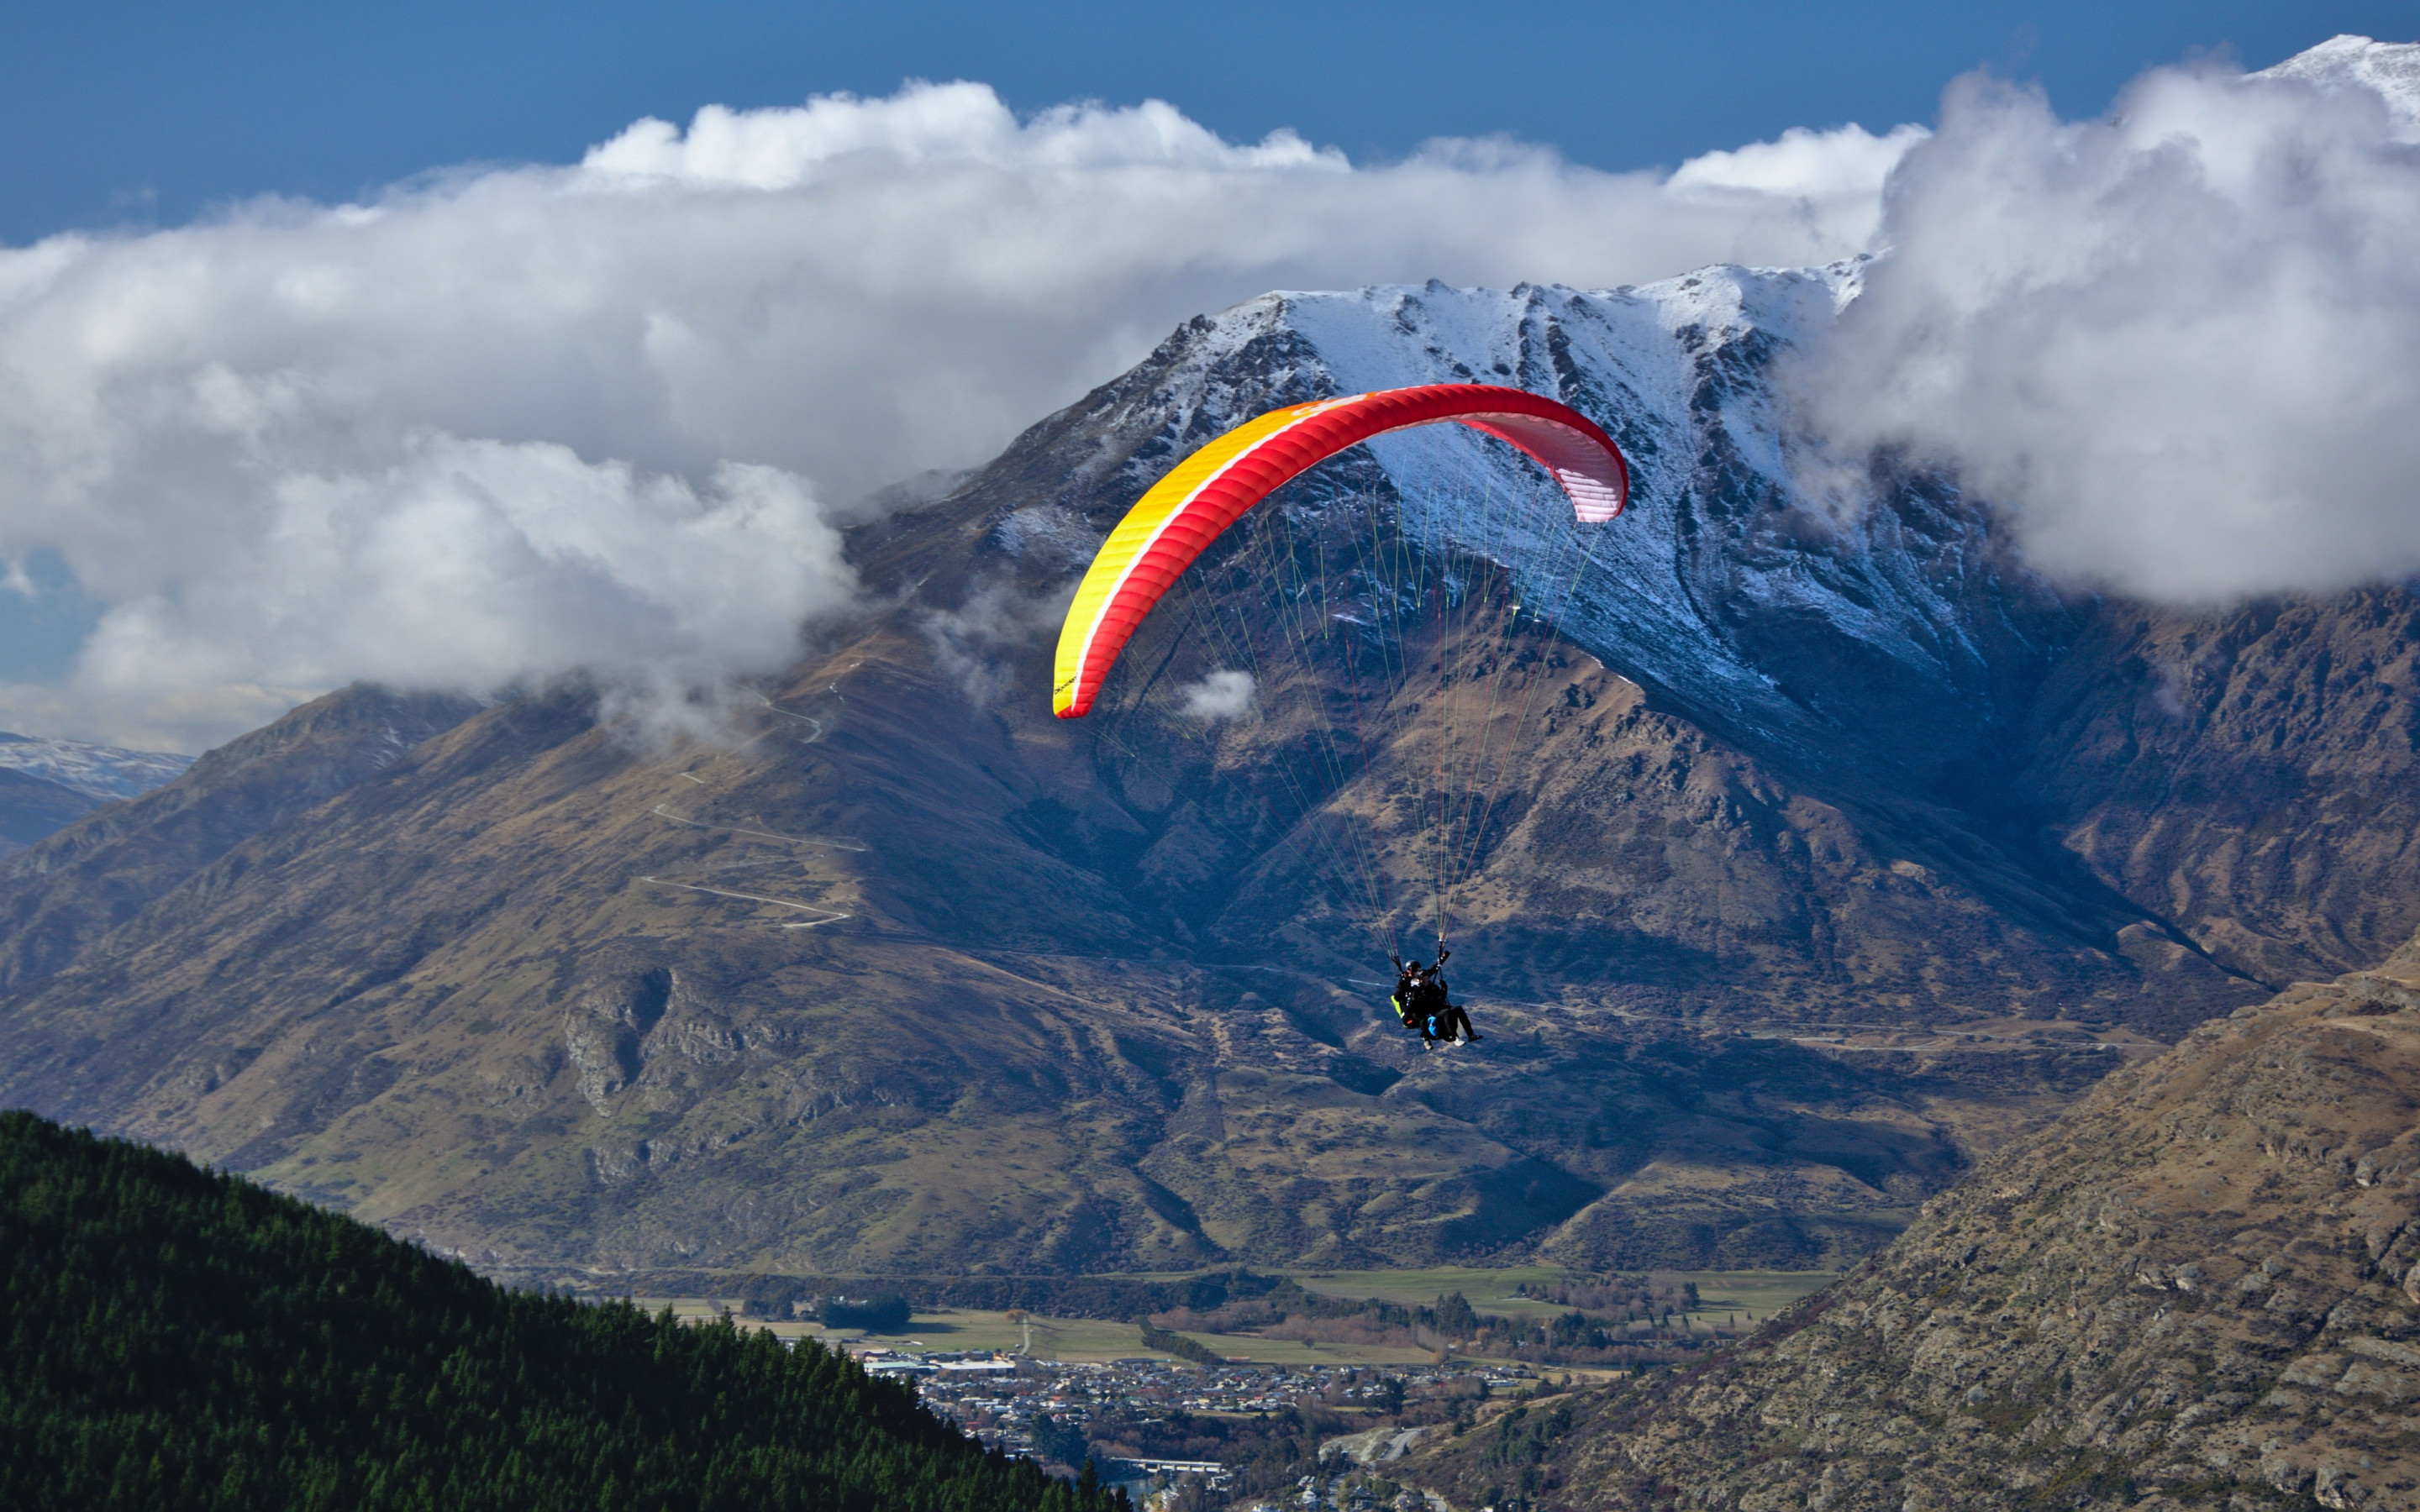 Paraglider up in the sky wallpaper 2880x1800